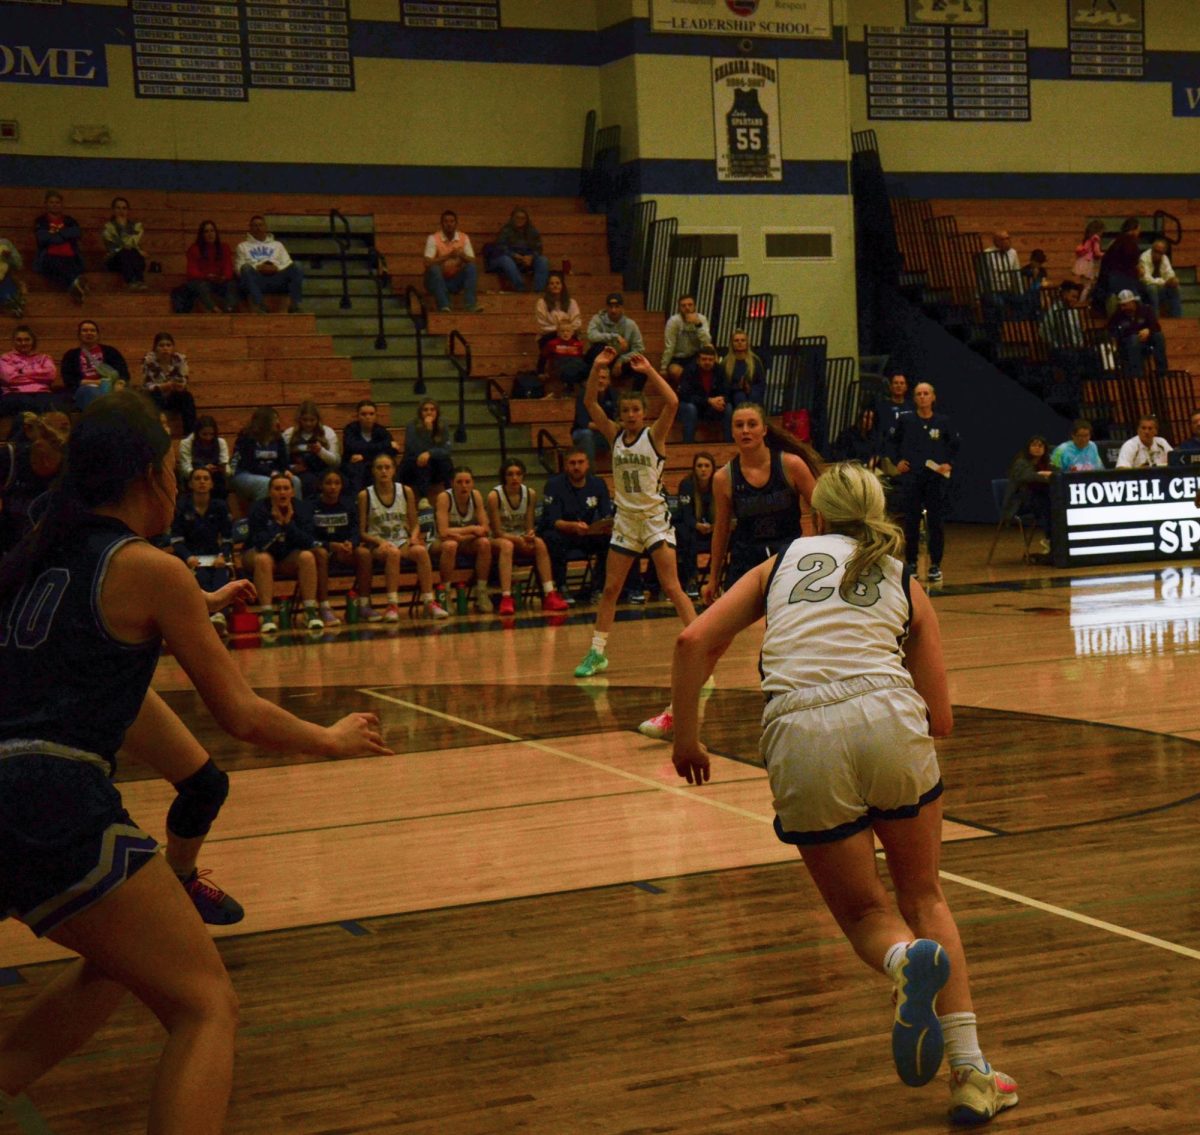 Junior Addie Henderson finds an open lane on the court, and makes a move towards the basket.